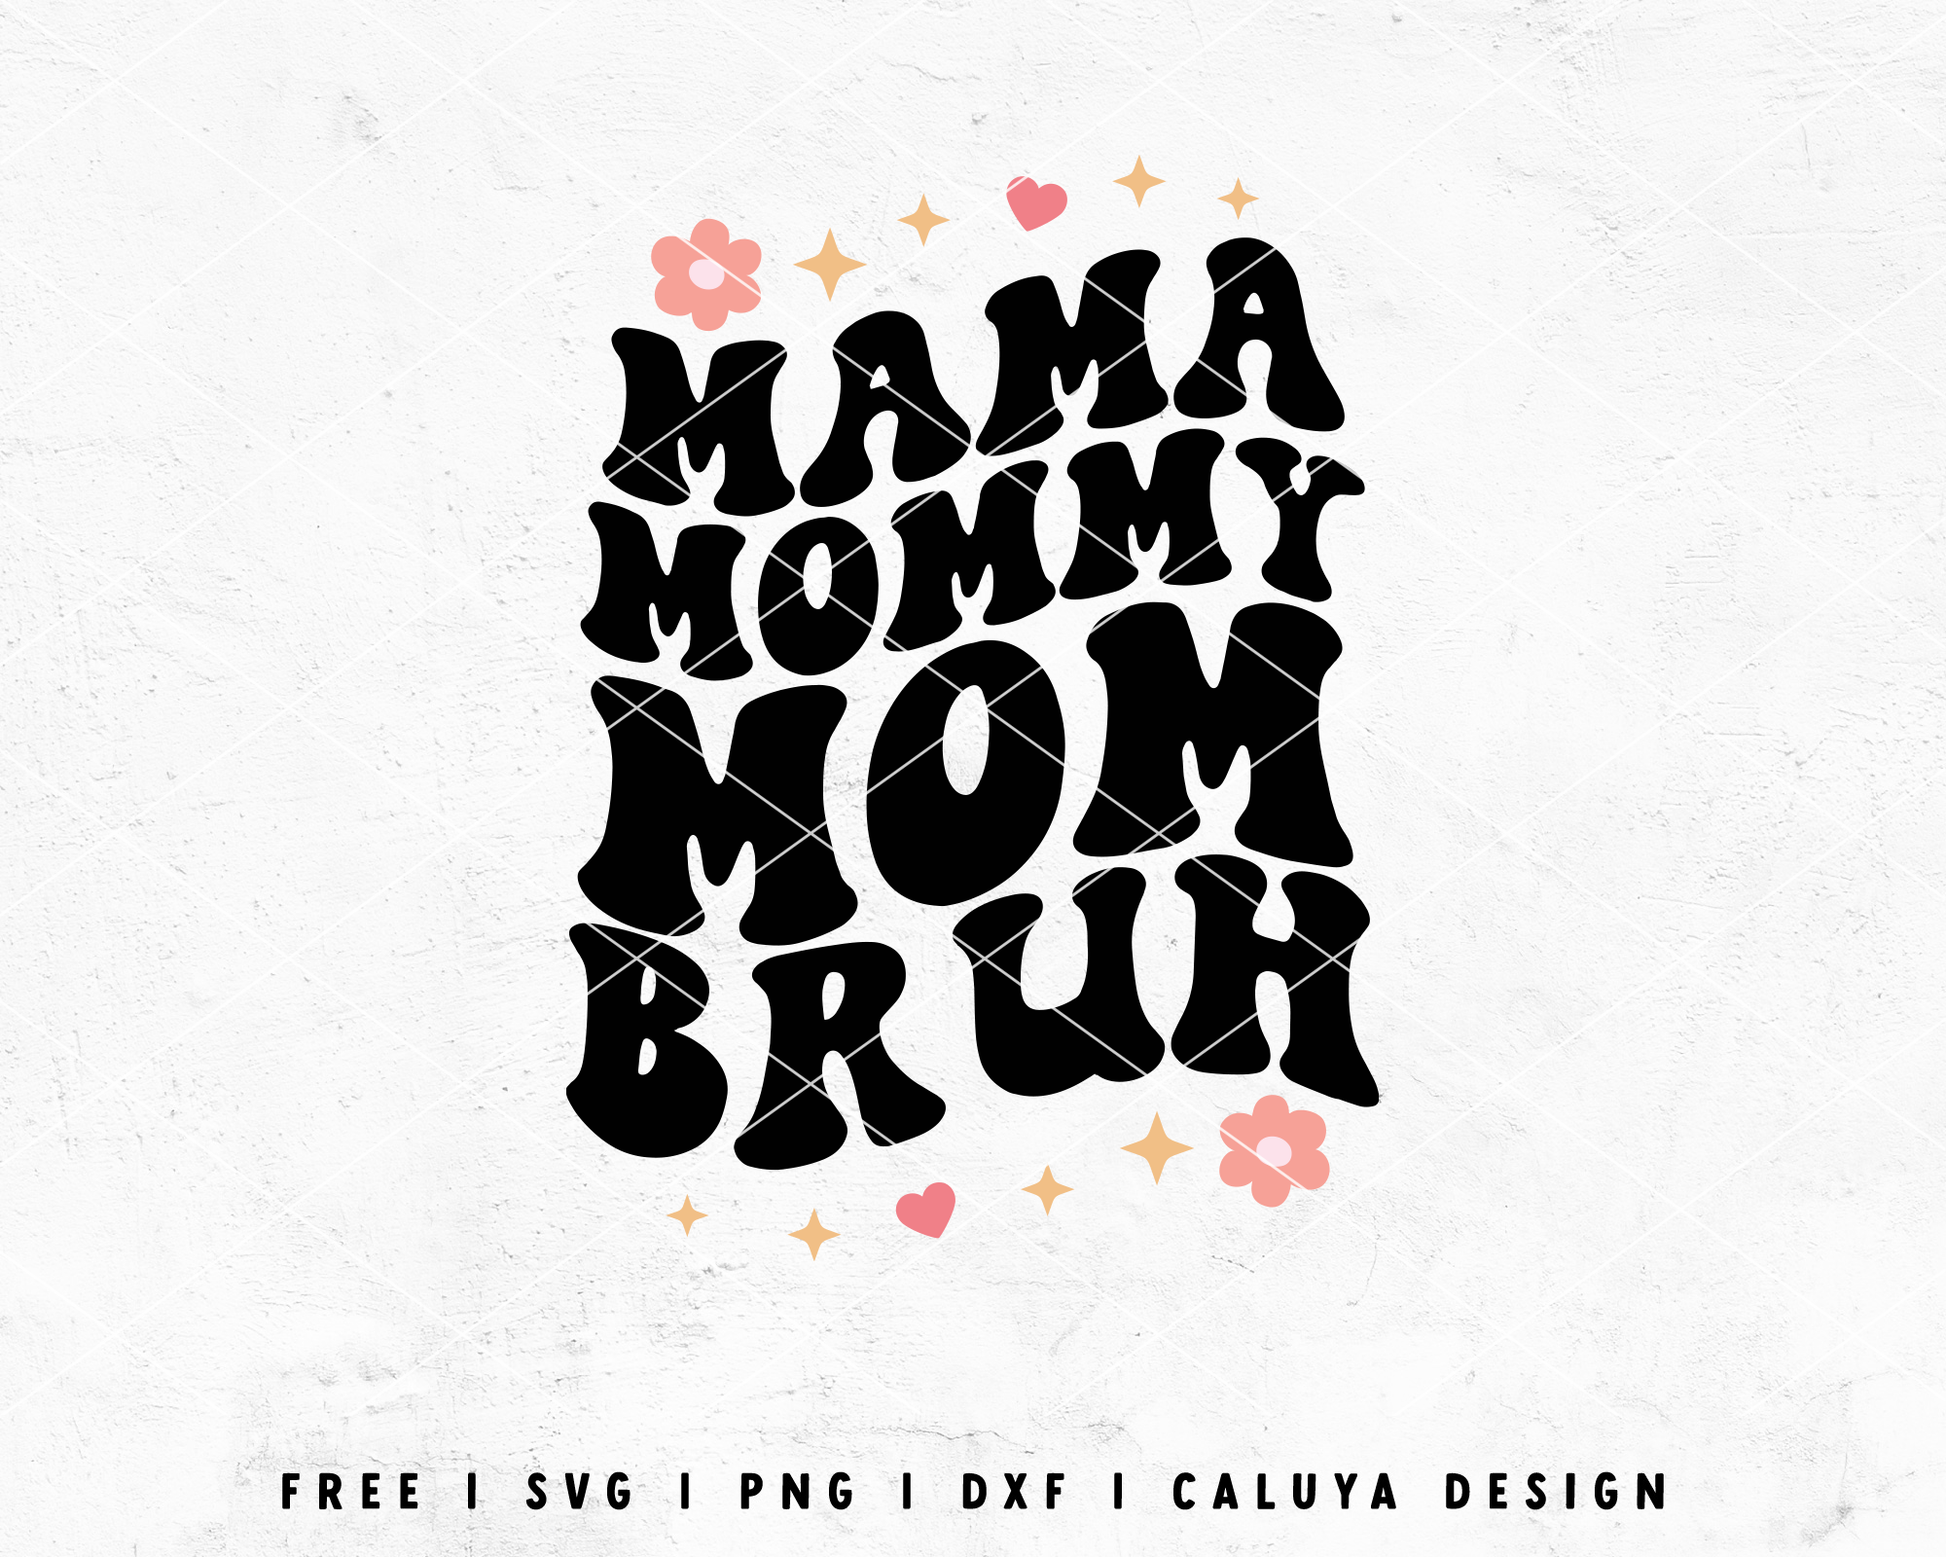 FREE Mama Mommy Mom Bruh SVG | Mothers Day SVG Cut File for Cricut, Cameo Silhouette | Free SVG Cut File